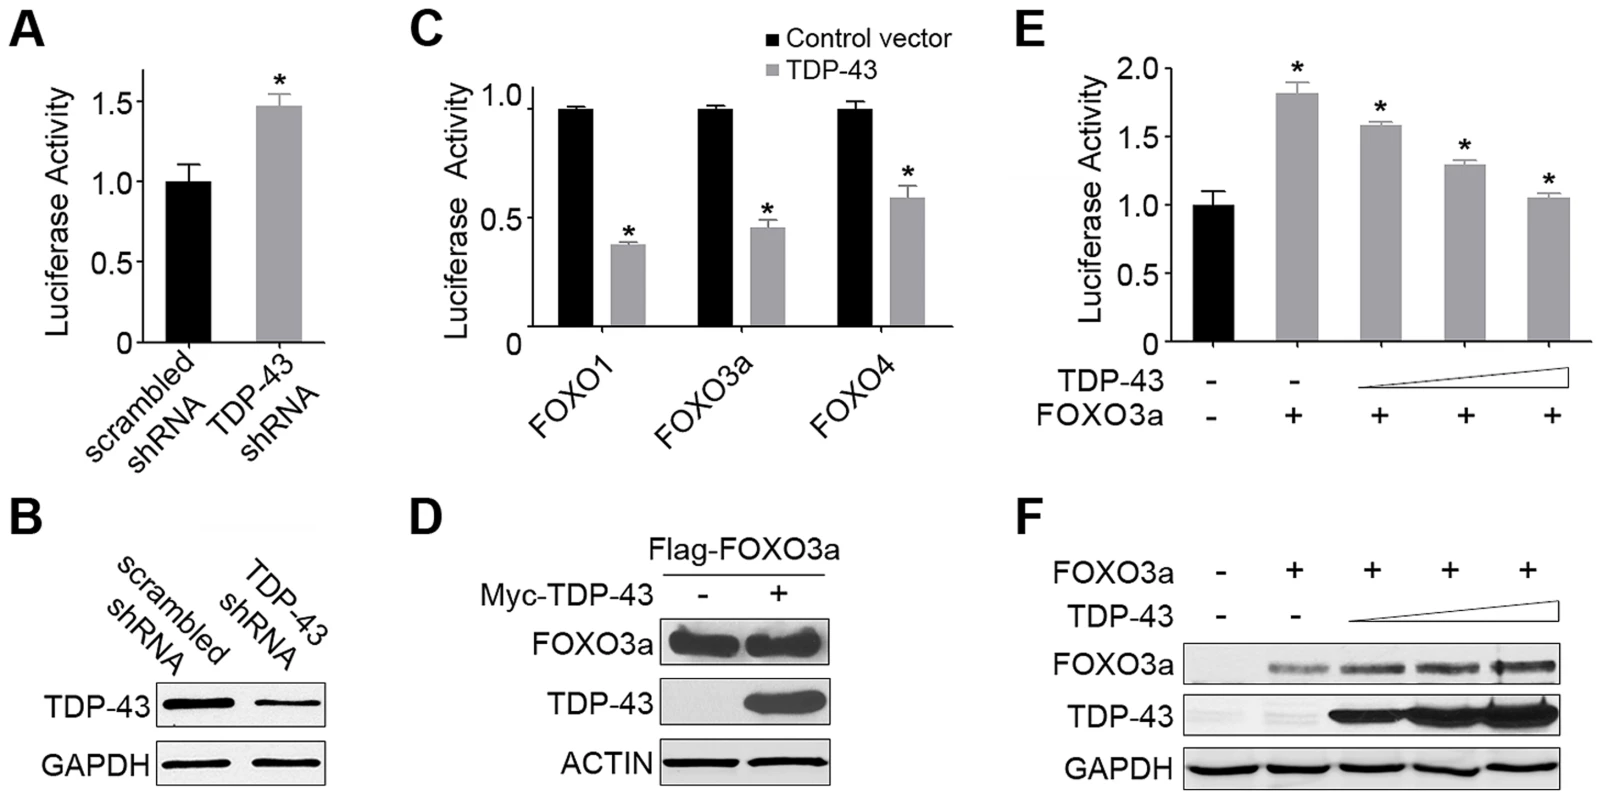 TDP-43 negatively regulates the transcriptional activity of FOXOs in mammalian cells.